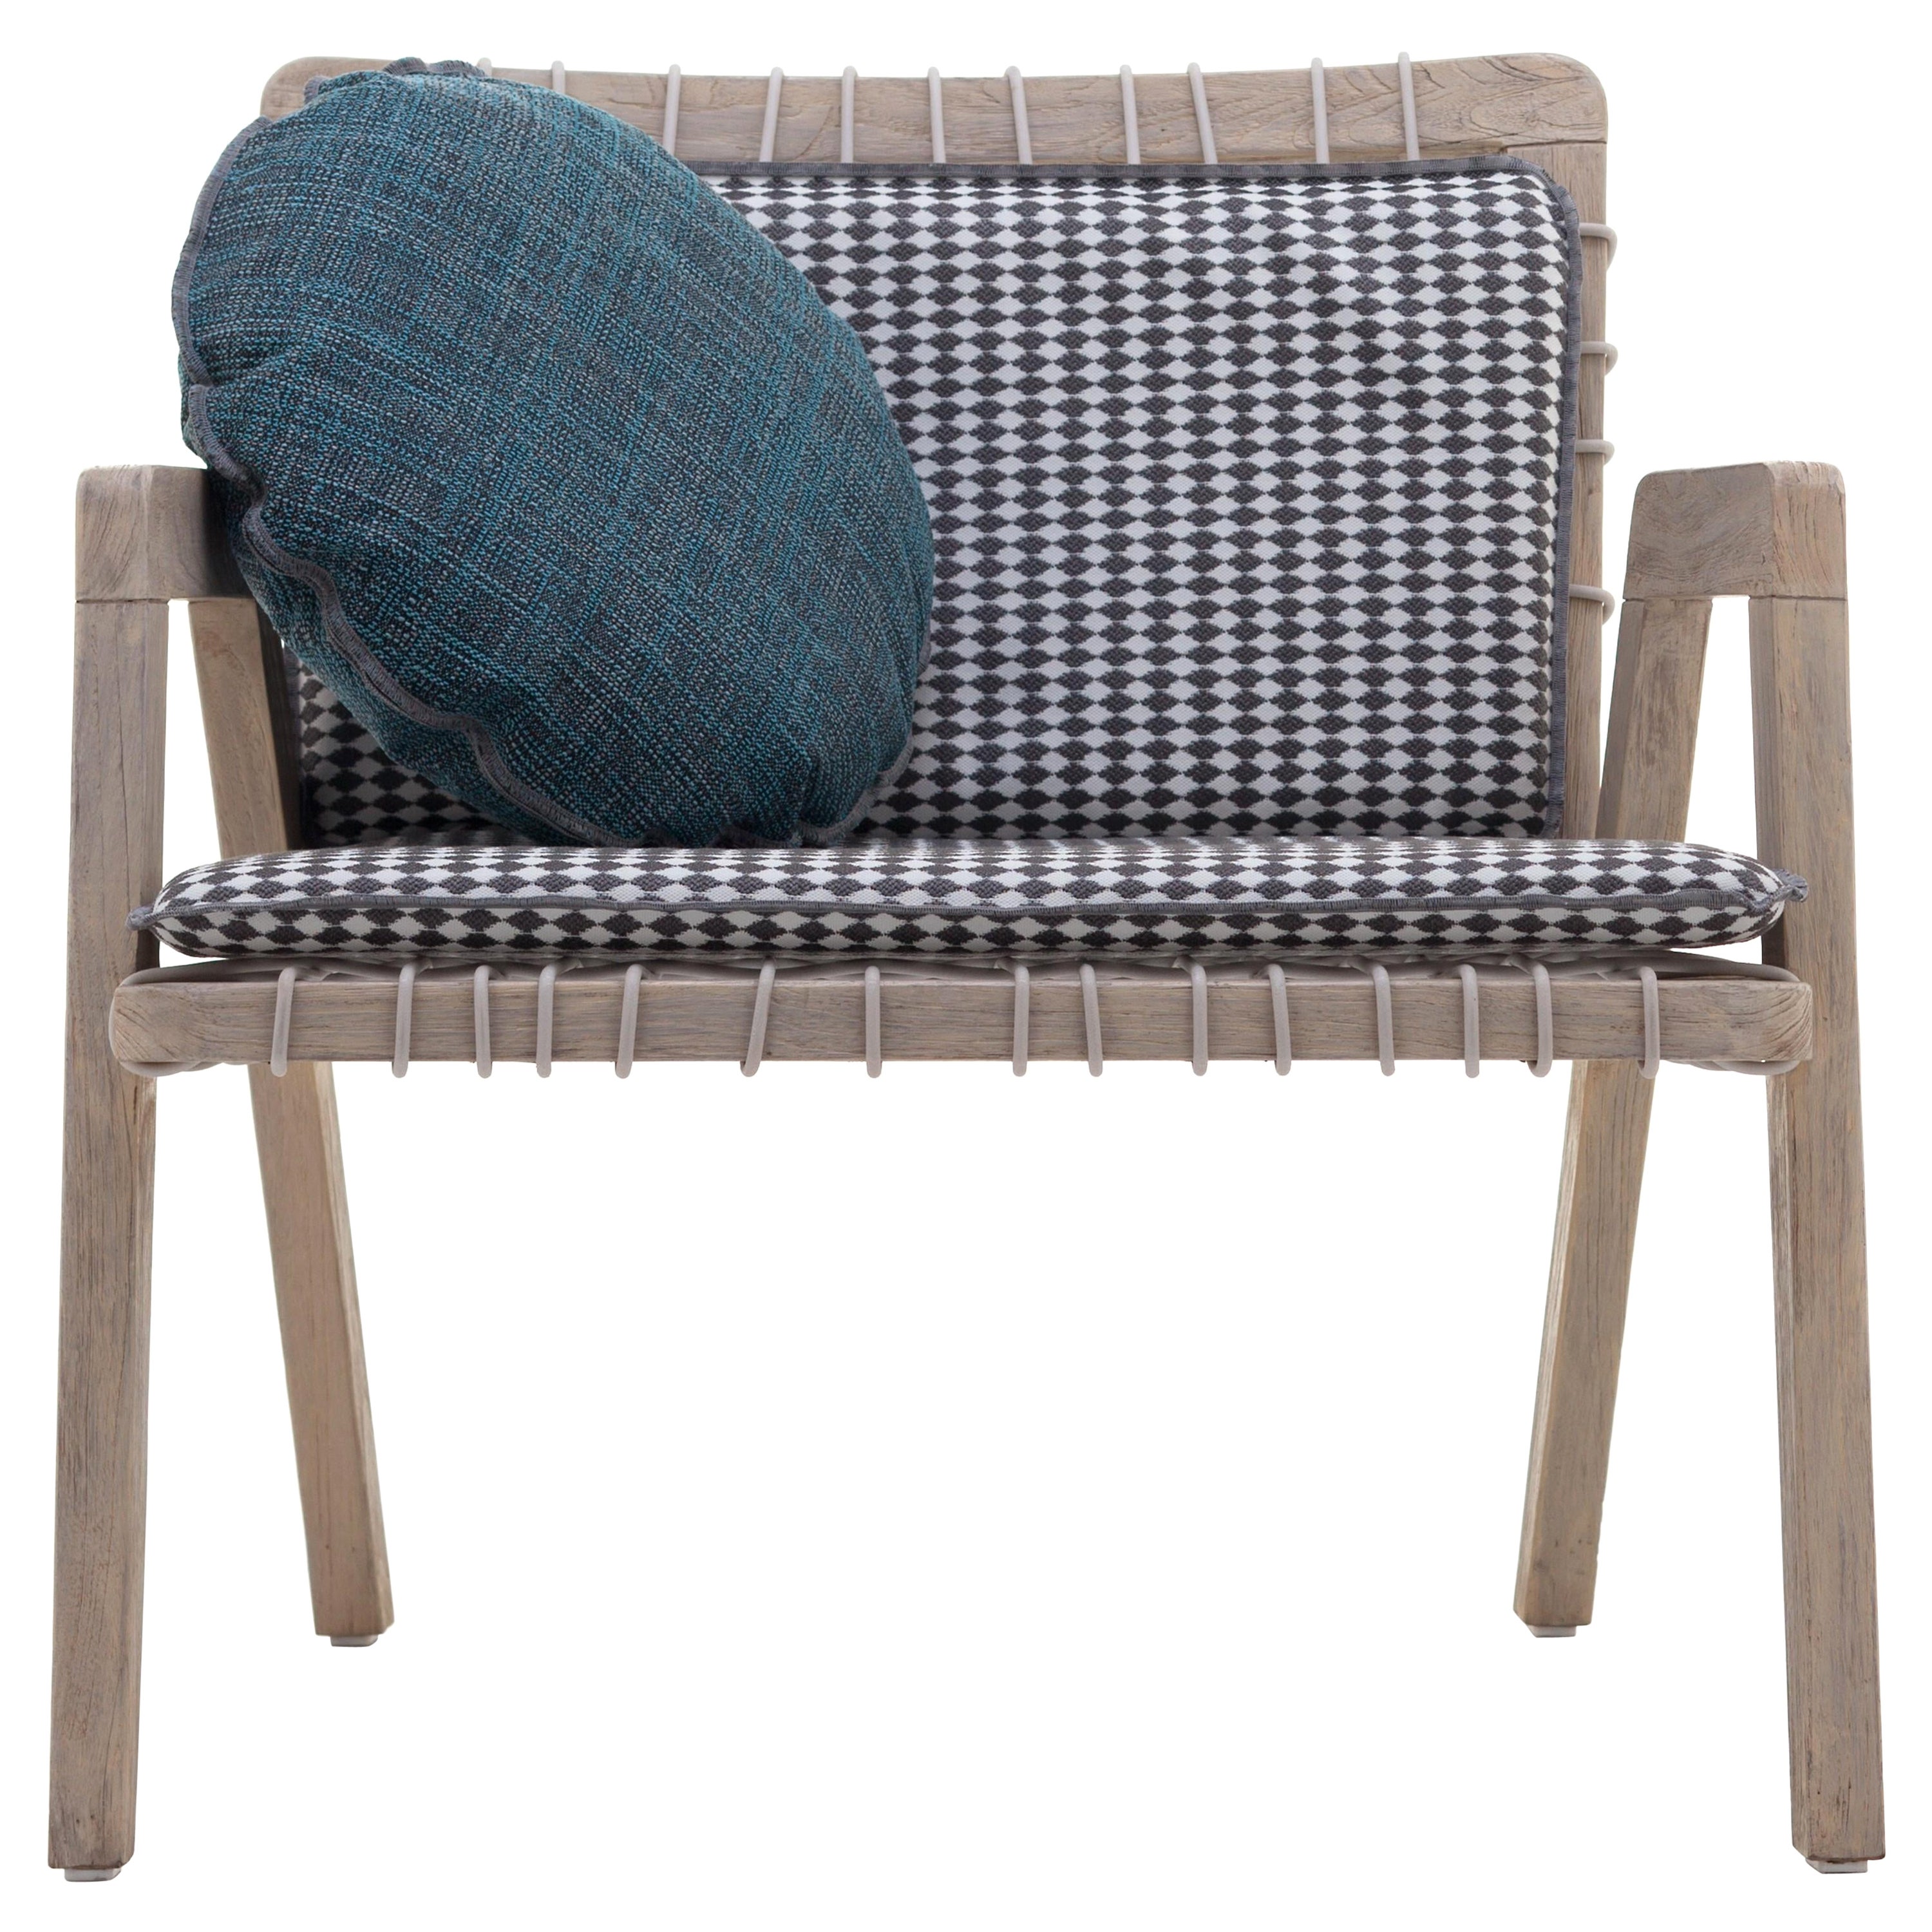 Gervasoni Inout Armchair in Lisboa 07 Upholstery & Washed Teak Frame with Woven